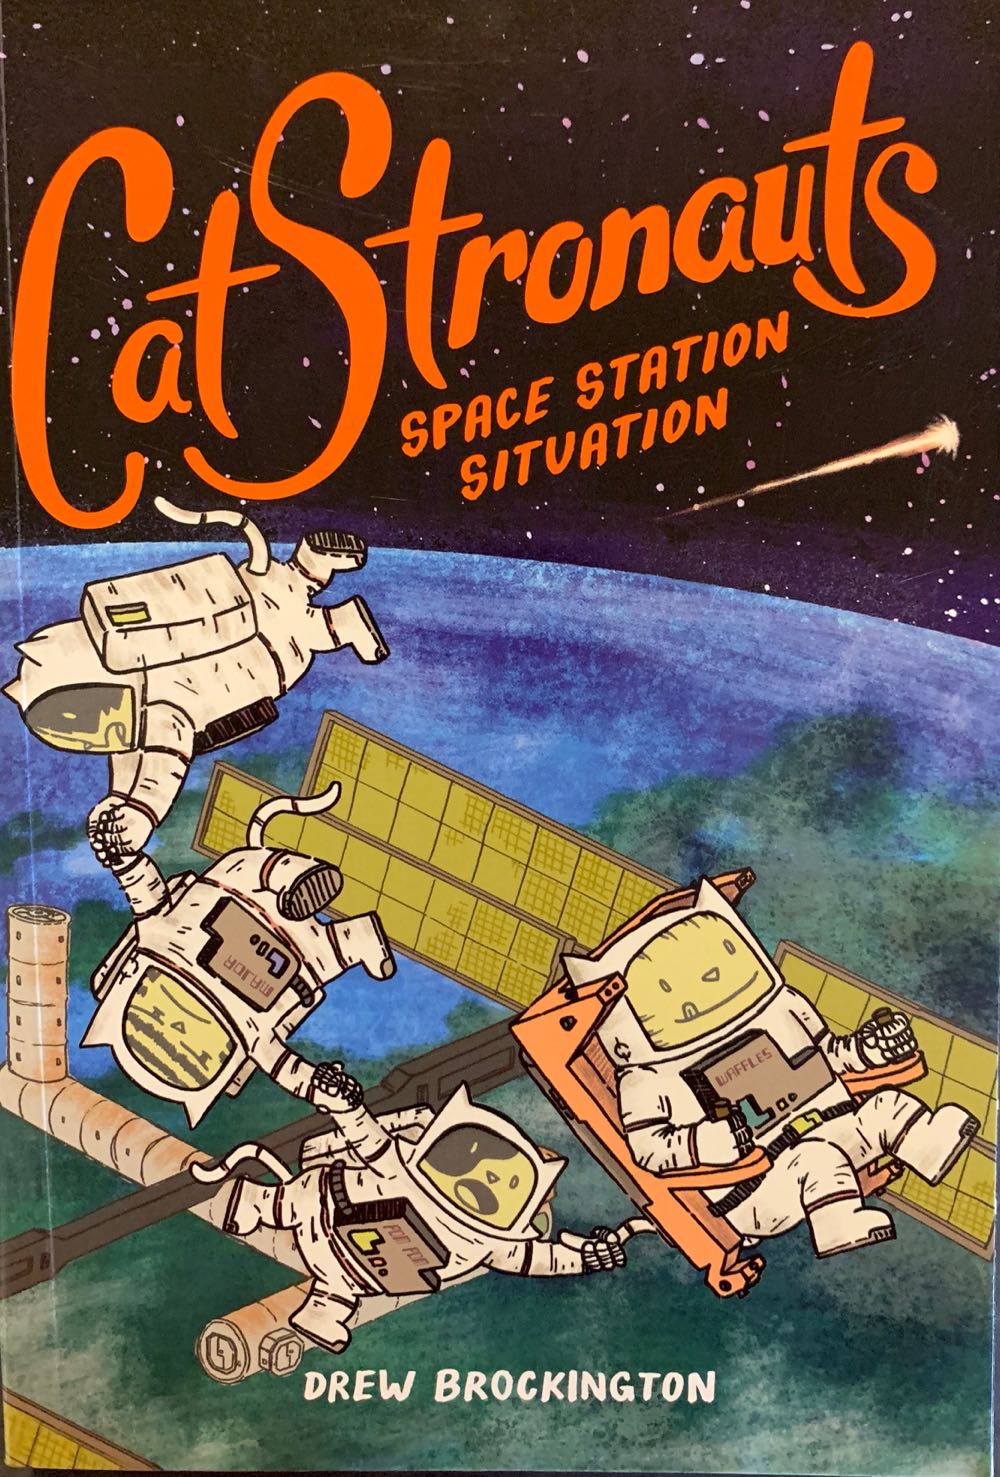 CatStronauts, Book 3: Space Station Situation - Drew Brockington (Little, Brown Books for Young Readers - Paperback) book collectible [Barcode 9780316307536] - Main Image 1